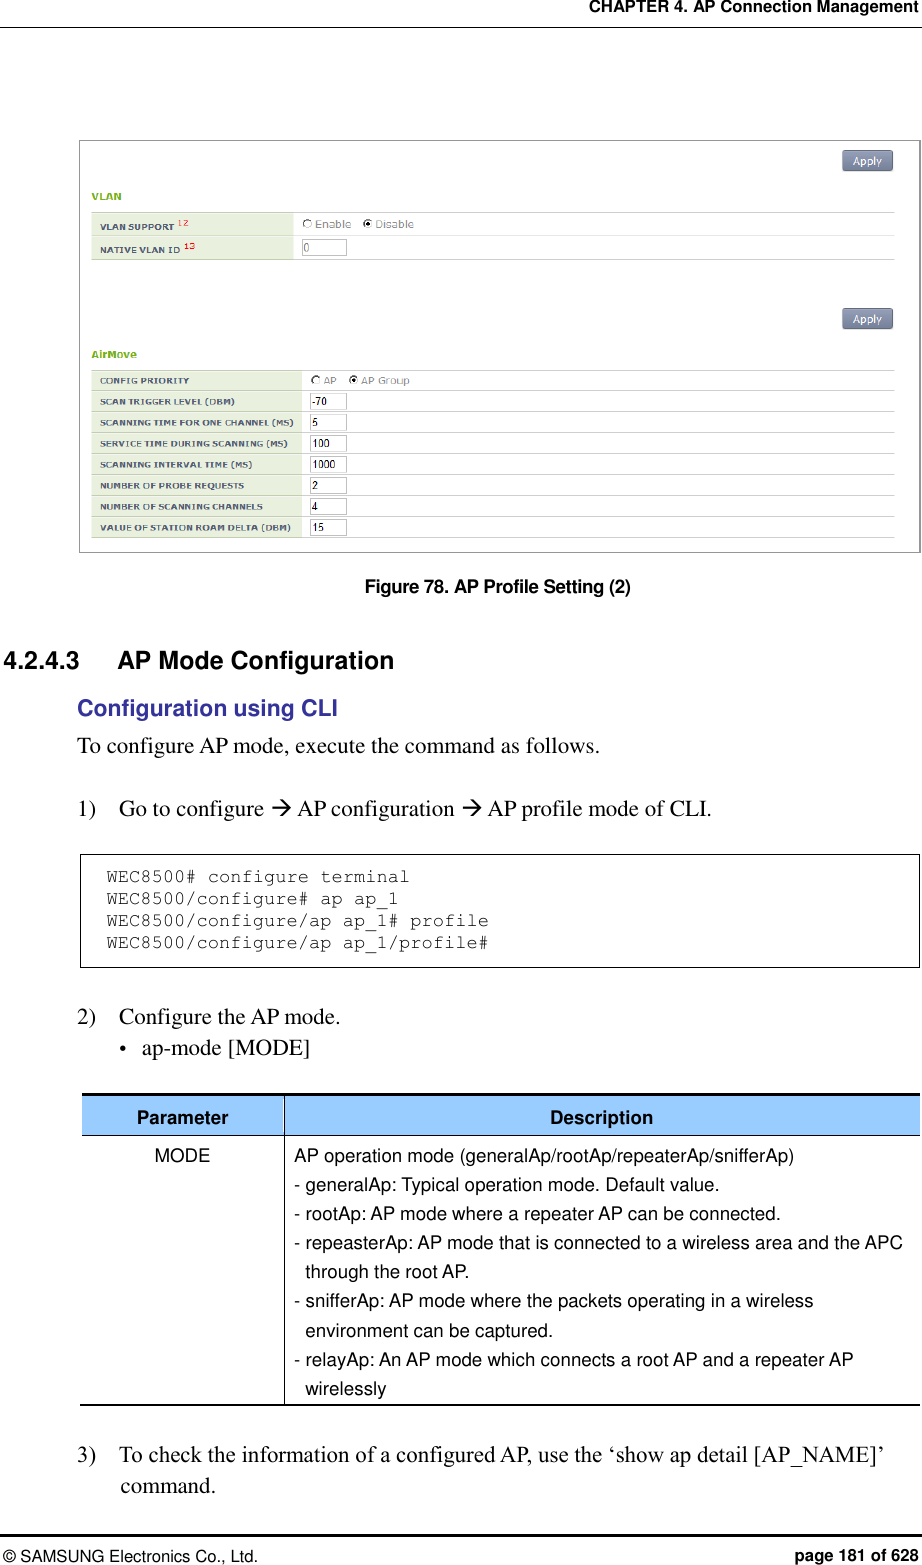 CHAPTER 4. AP Connection Management ©  SAMSUNG Electronics Co., Ltd.  page 181 of 628  Figure 78. AP Profile Setting (2)  4.2.4.3  AP Mode Configuration Configuration using CLI To configure AP mode, execute the command as follows.  1)    Go to configure  AP configuration  AP profile mode of CLI.  WEC8500# configure terminal WEC8500/configure# ap ap_1 WEC8500/configure/ap ap_1# profile WEC8500/configure/ap ap_1/profile#  2)    Configure the AP mode.  ap-mode [MODE]  Parameter Description MODE AP operation mode (generalAp/rootAp/repeaterAp/snifferAp) - generalAp: Typical operation mode. Default value. - rootAp: AP mode where a repeater AP can be connected. - repeasterAp: AP mode that is connected to a wireless area and the APC through the root AP. - snifferAp: AP mode where the packets operating in a wireless environment can be captured. - relayAp: An AP mode which connects a root AP and a repeater AP wirelessly  3)    To check the information of a configured AP, use the ‘show ap detail [AP_NAME]’ command. 